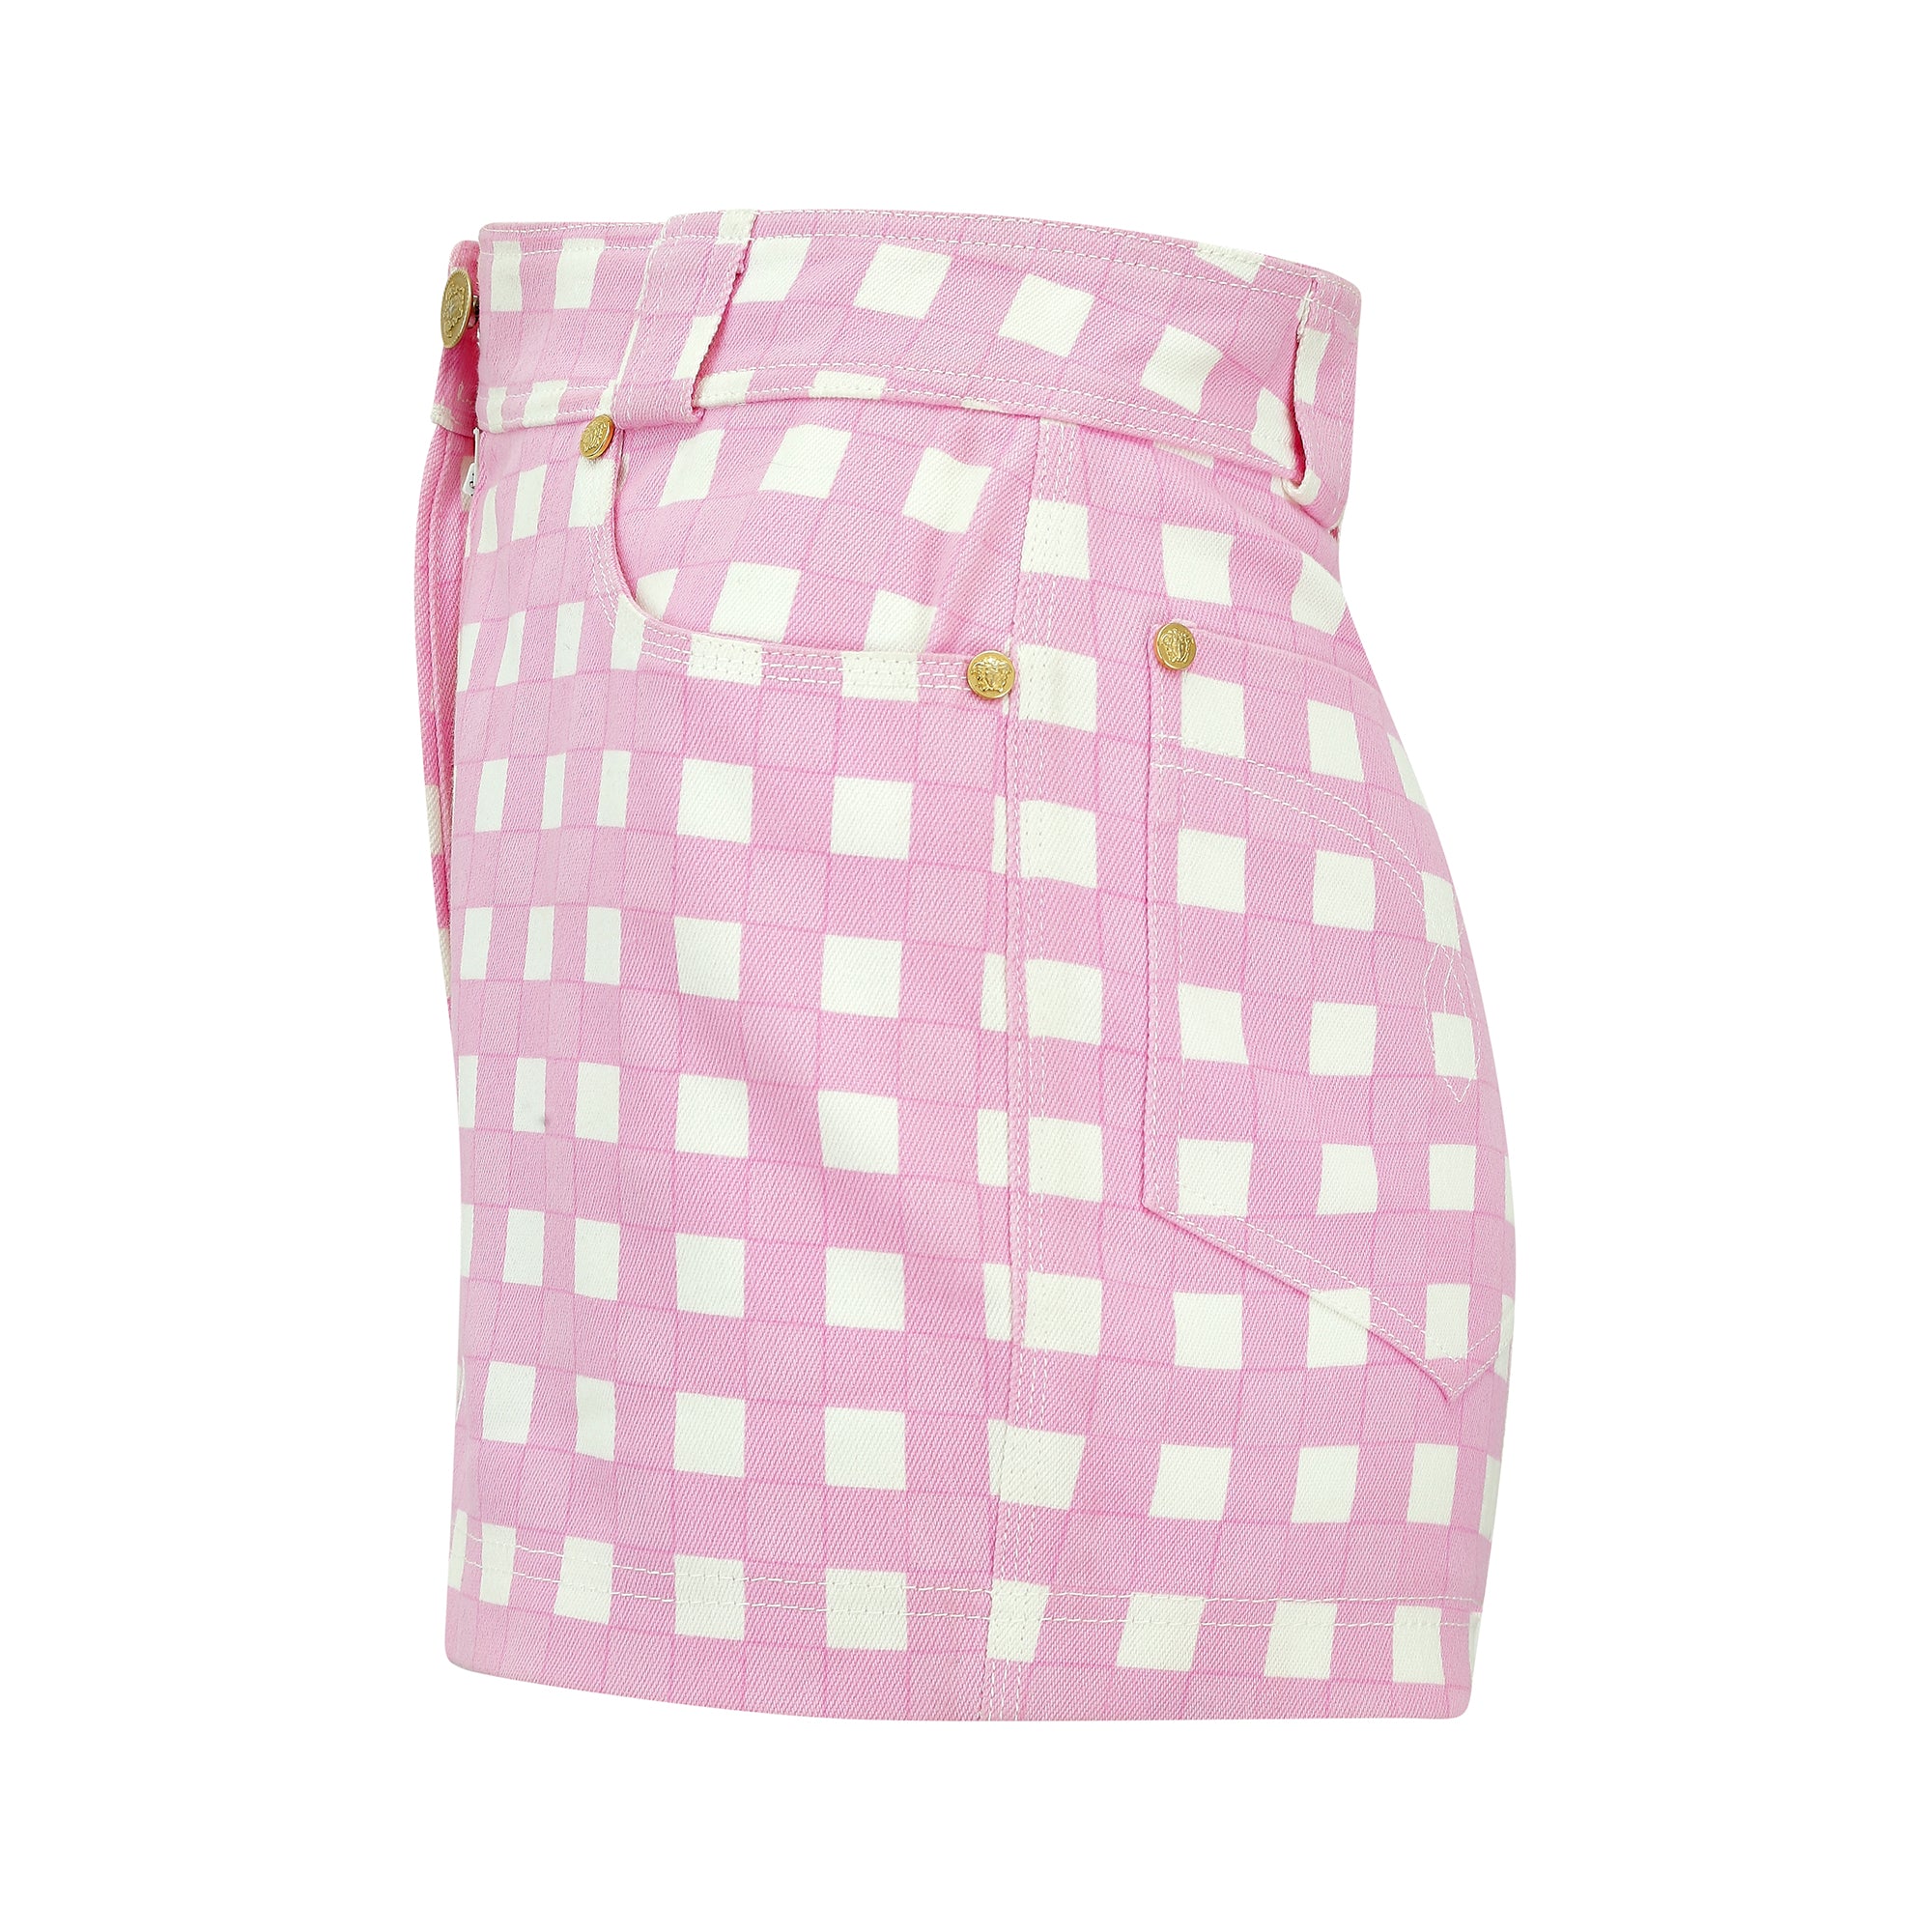 1993 Runway Gianni Versace Pink and White Gingham Shorts